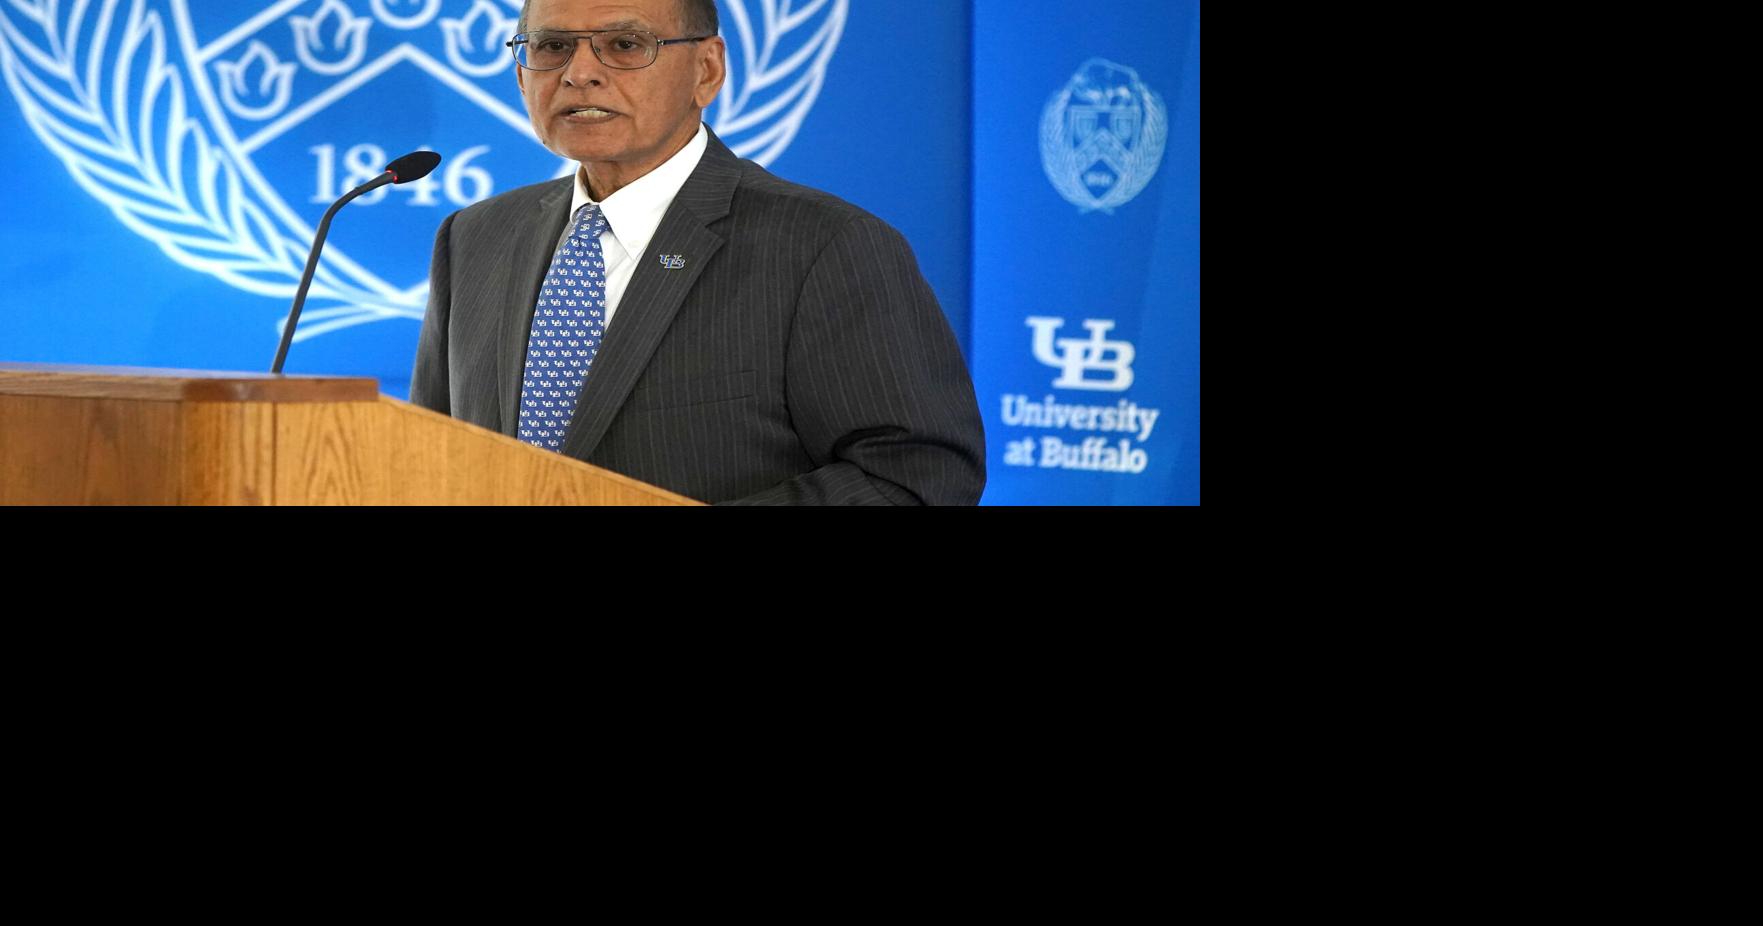 UB more than two-thirds toward $650 million campaign goal